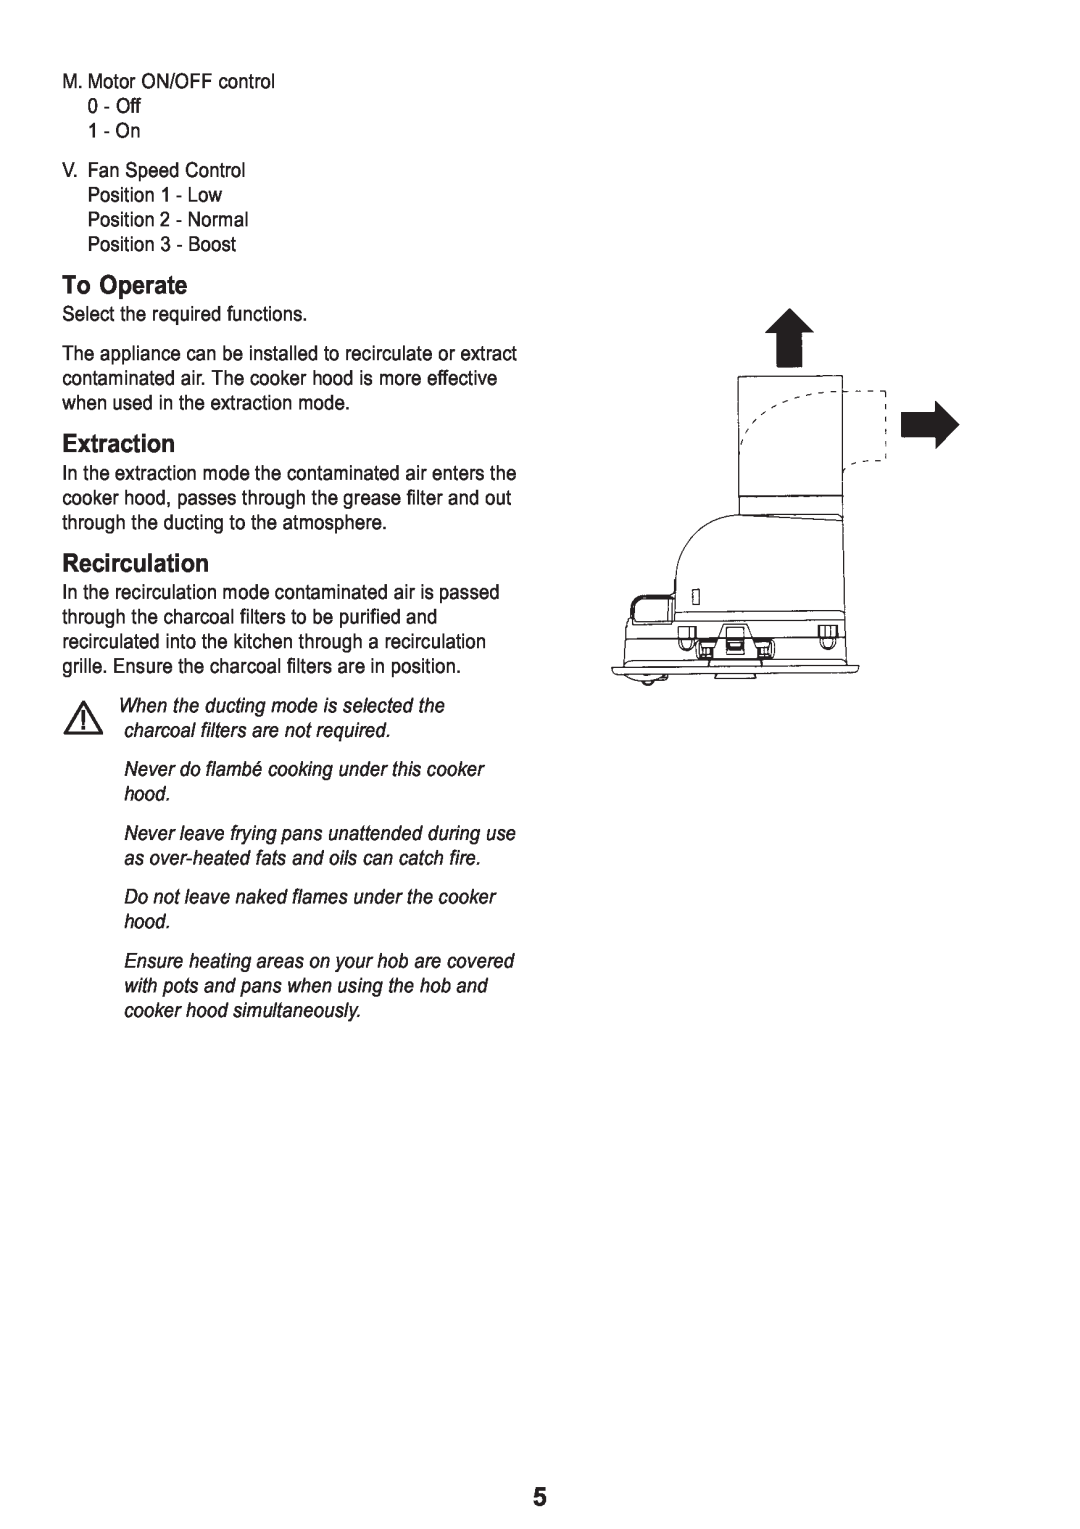 Electrolux EFG 525, EFG 530 manual To Operate, Extraction, Recirculation, Never do flambé cooking under this cooker hood 